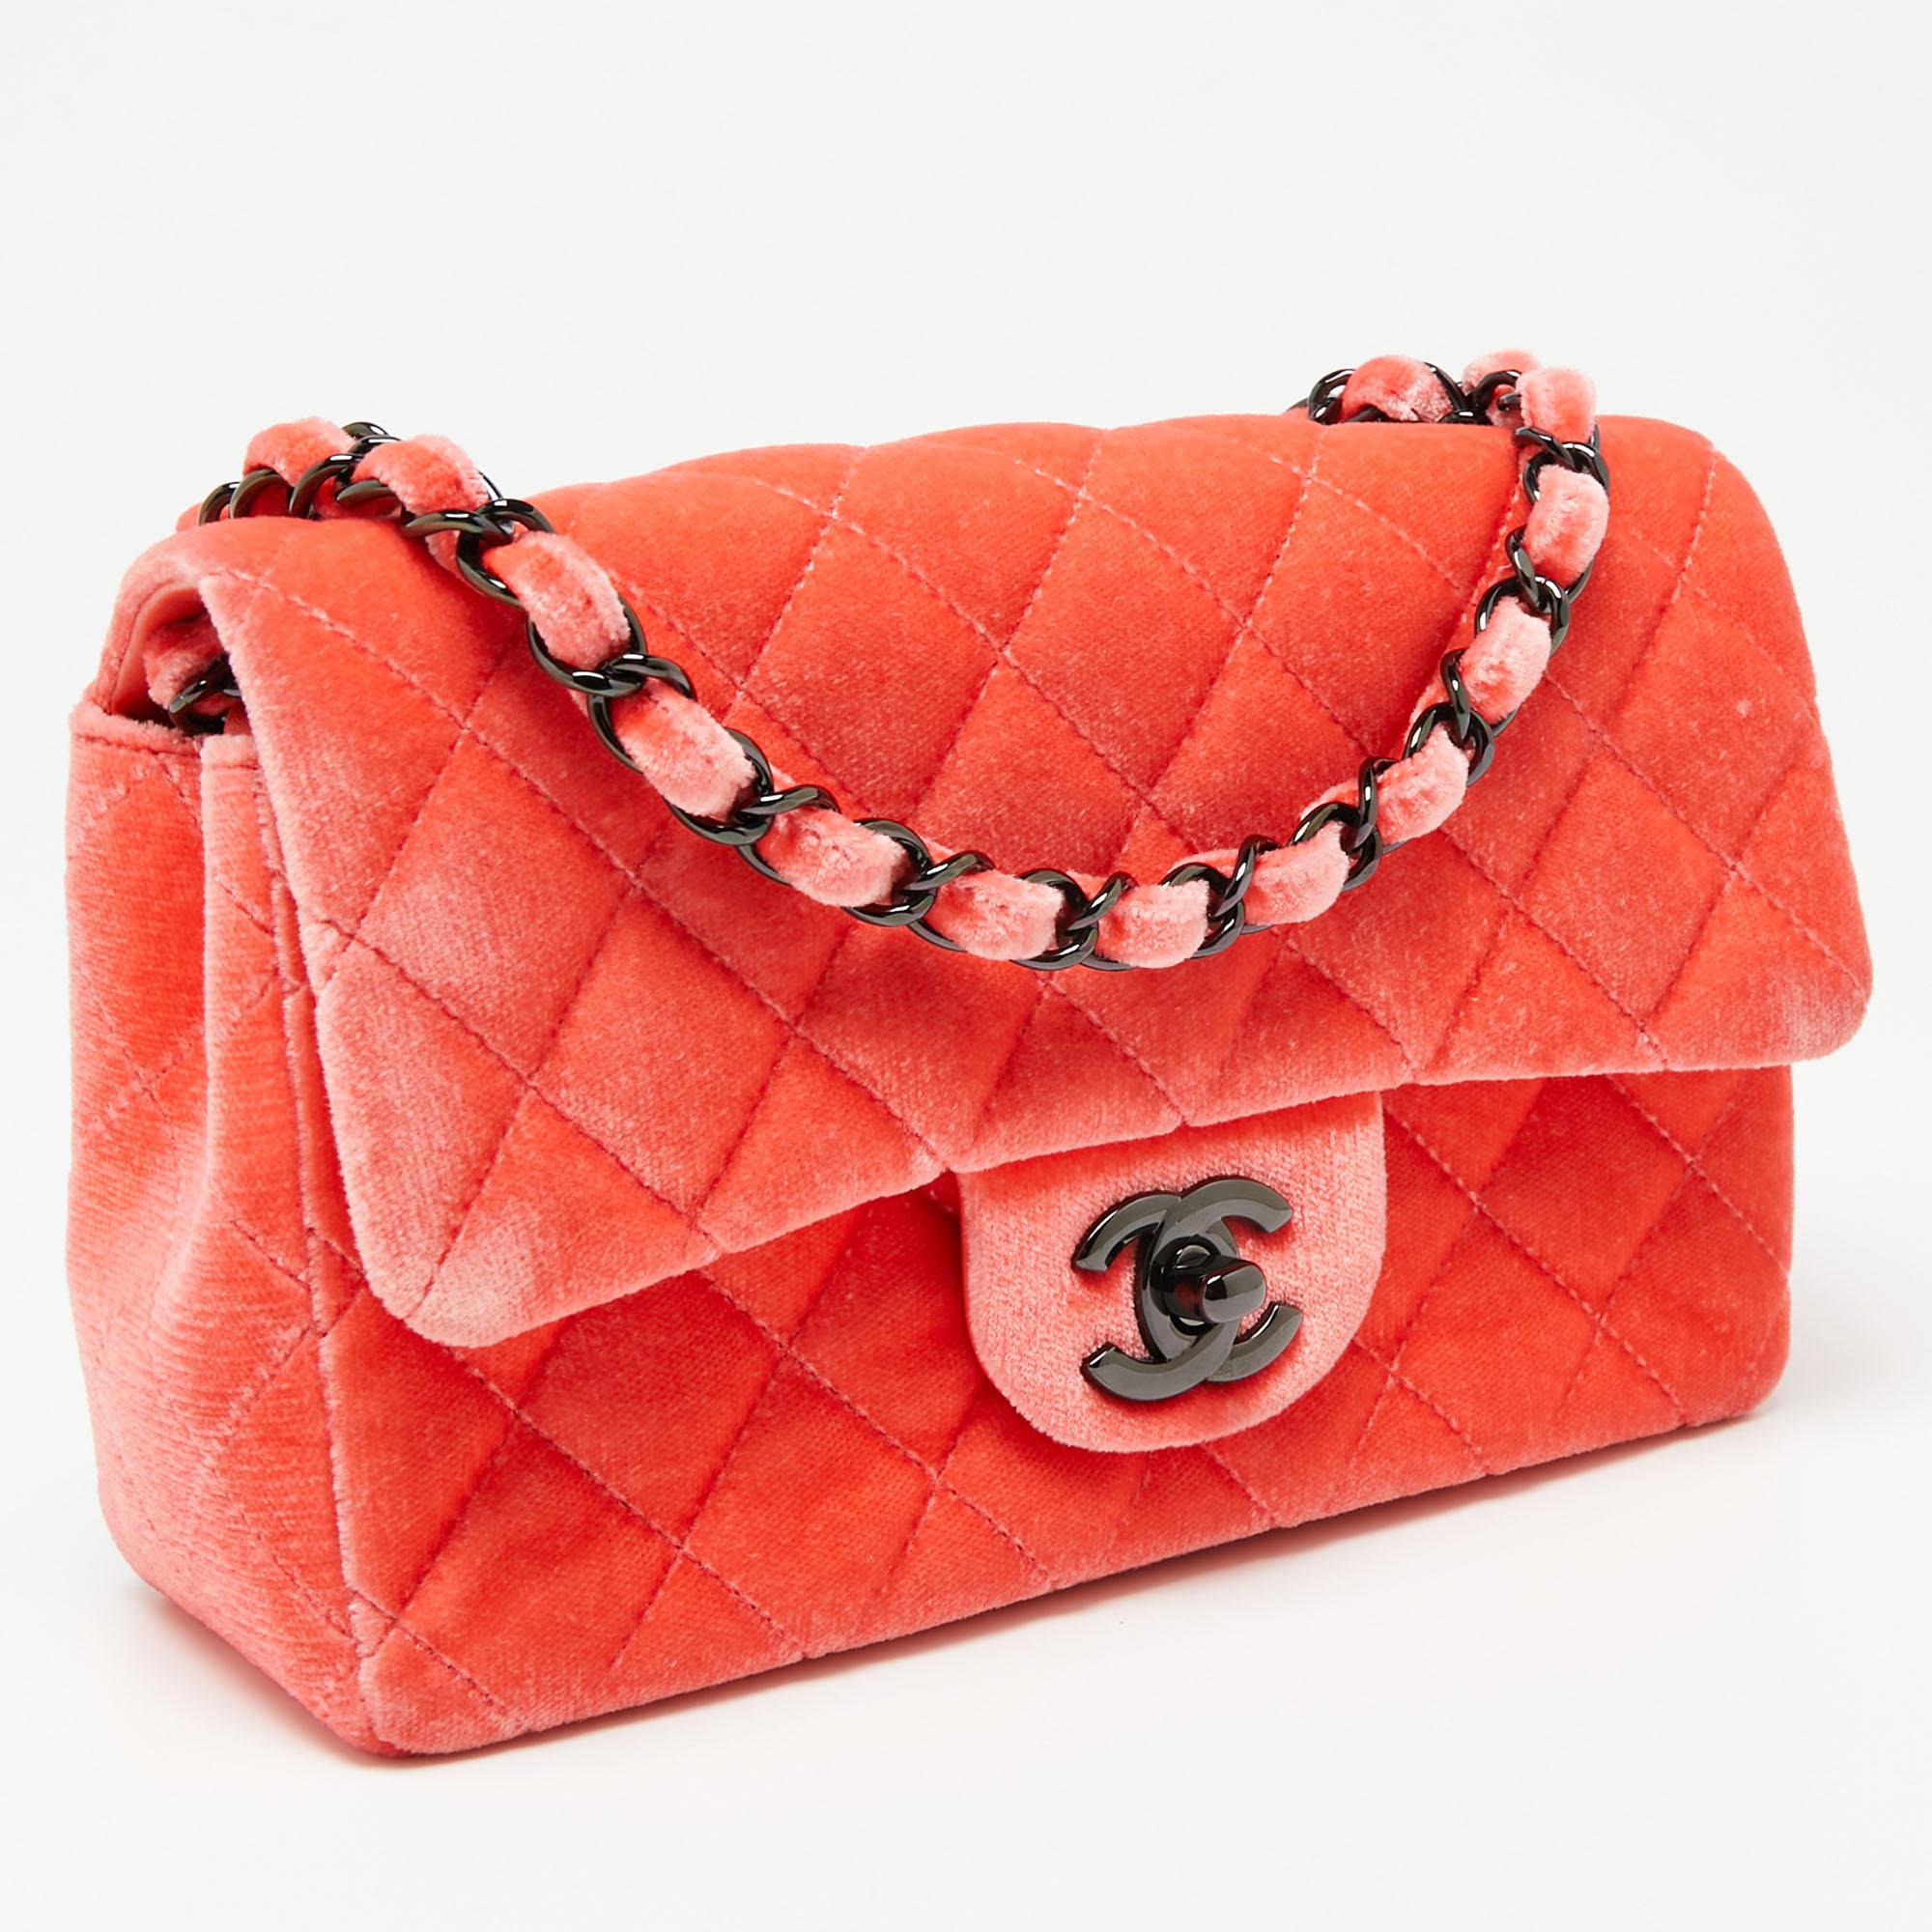 The Chanel New Mini Classic Flap bag is a sized-down version of the icon. We have here the one in coral velvet. It has the signature quilt, the CC lock, and the brand label inside the interior. The long woven chain allows shoulder as well as